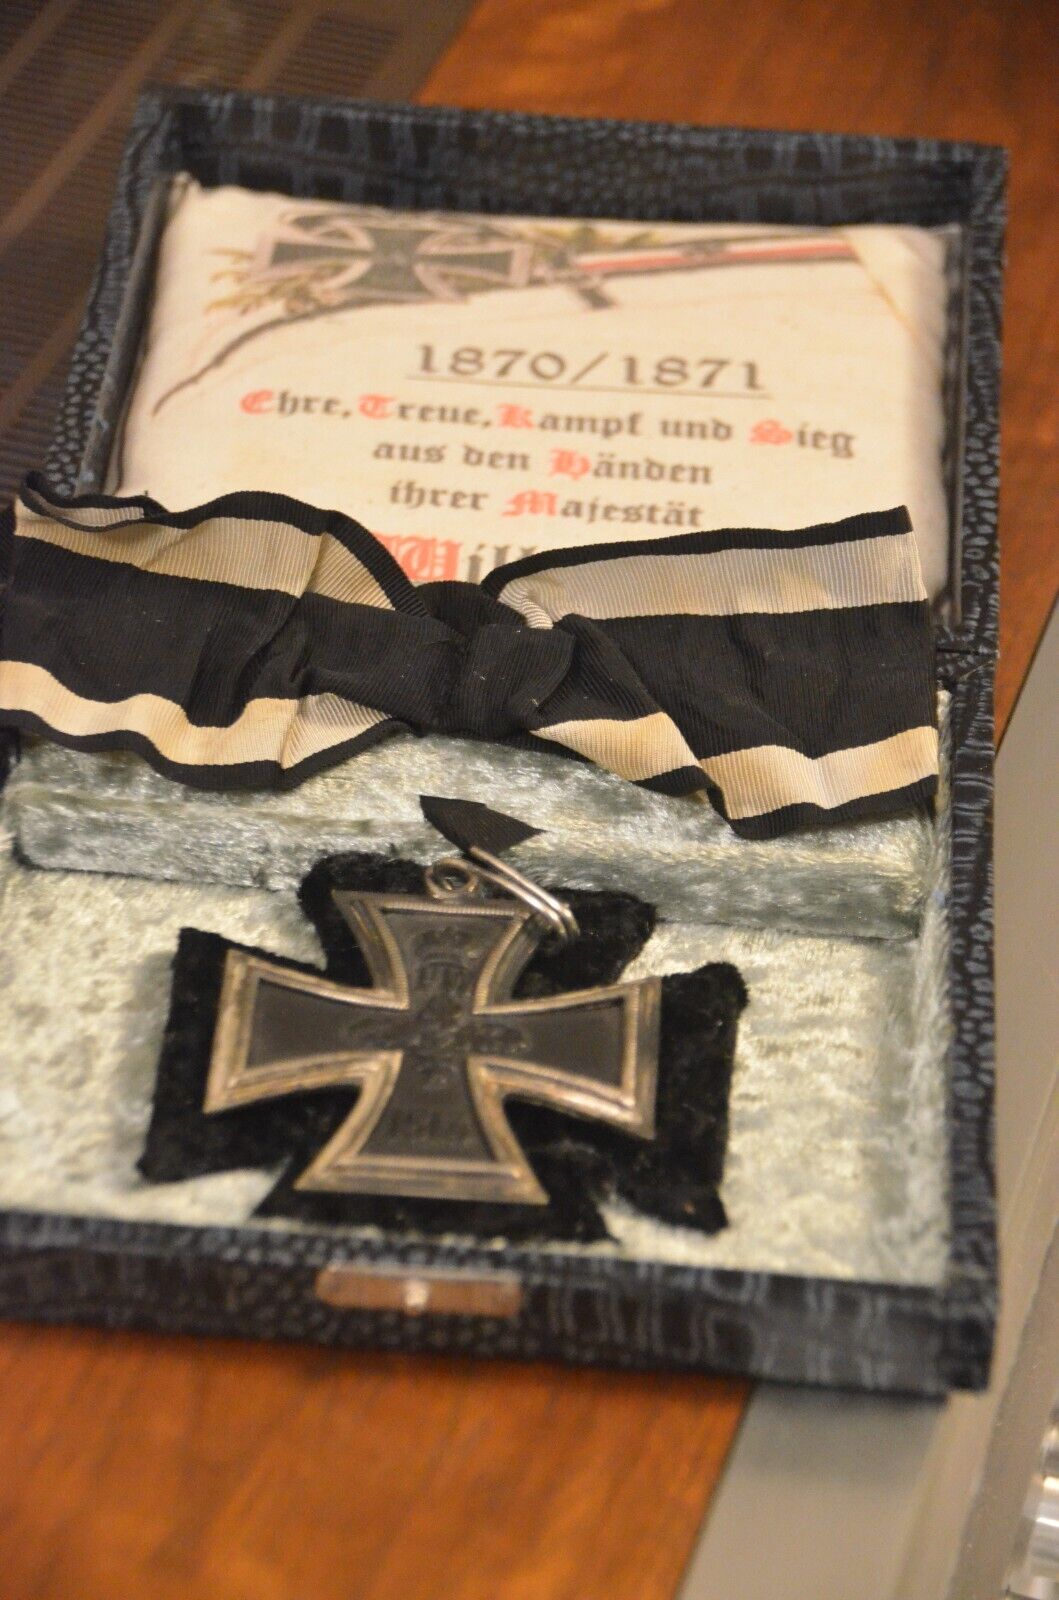 EXTREMELY RARE VINTAGE 1870 GRAND CROSS OF THE IRON CROSS WITH RIBBON HALLMARKED